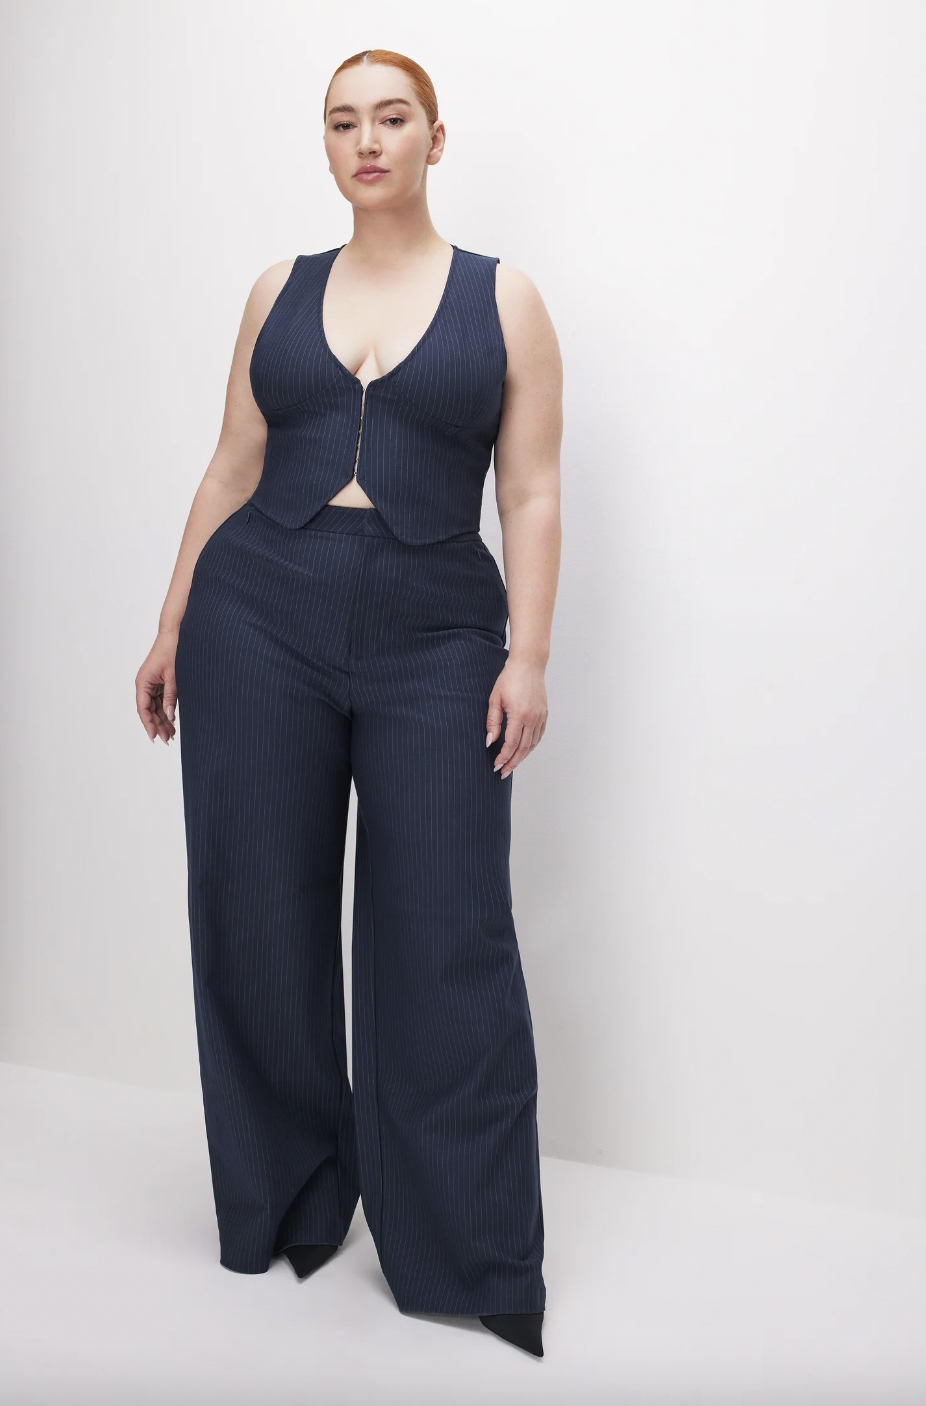 Woman in a stylish pinstripe jumpsuit, posing with hands on hips